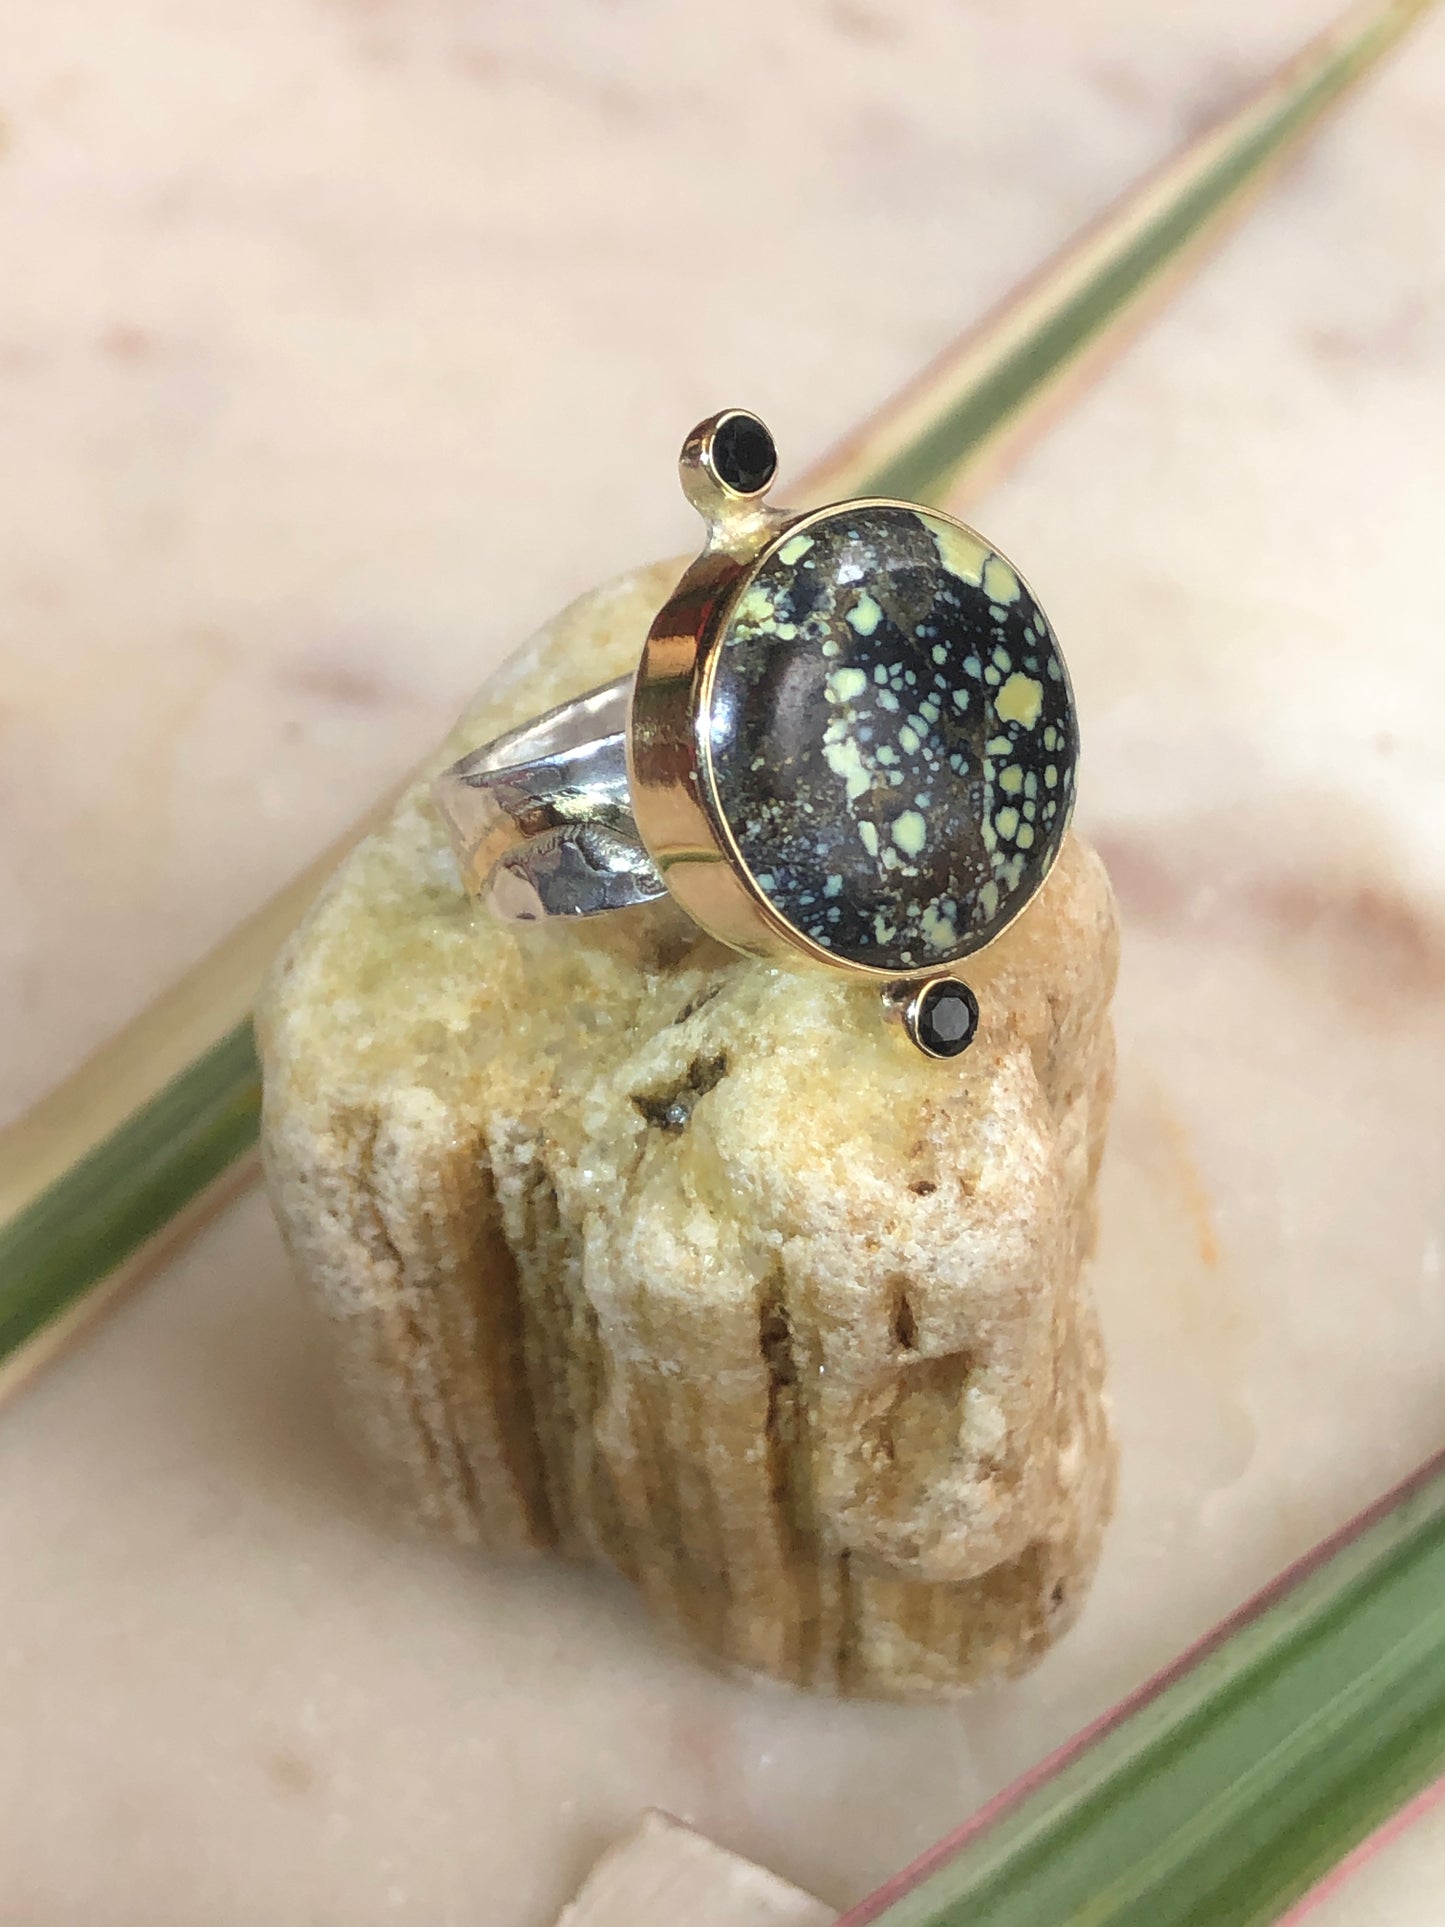 Poseidon Variscite with Faceted Onyx Details set in 10K Gold Bezel Size 8